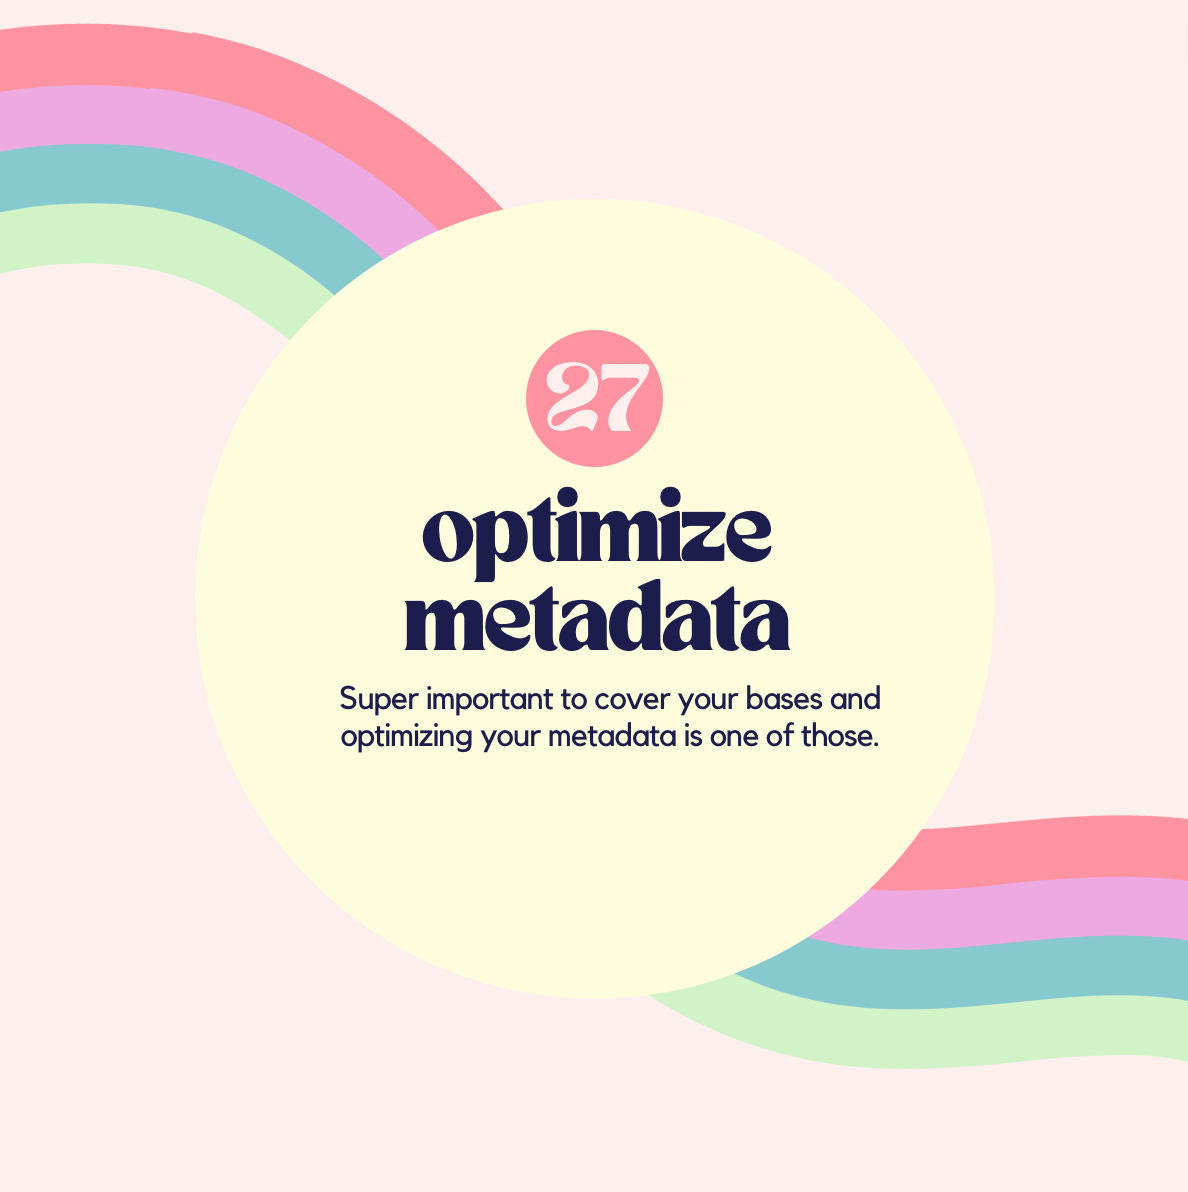 #27 Optimize metadata. Super important to cover your bases and optimizing your metadata is one of those.